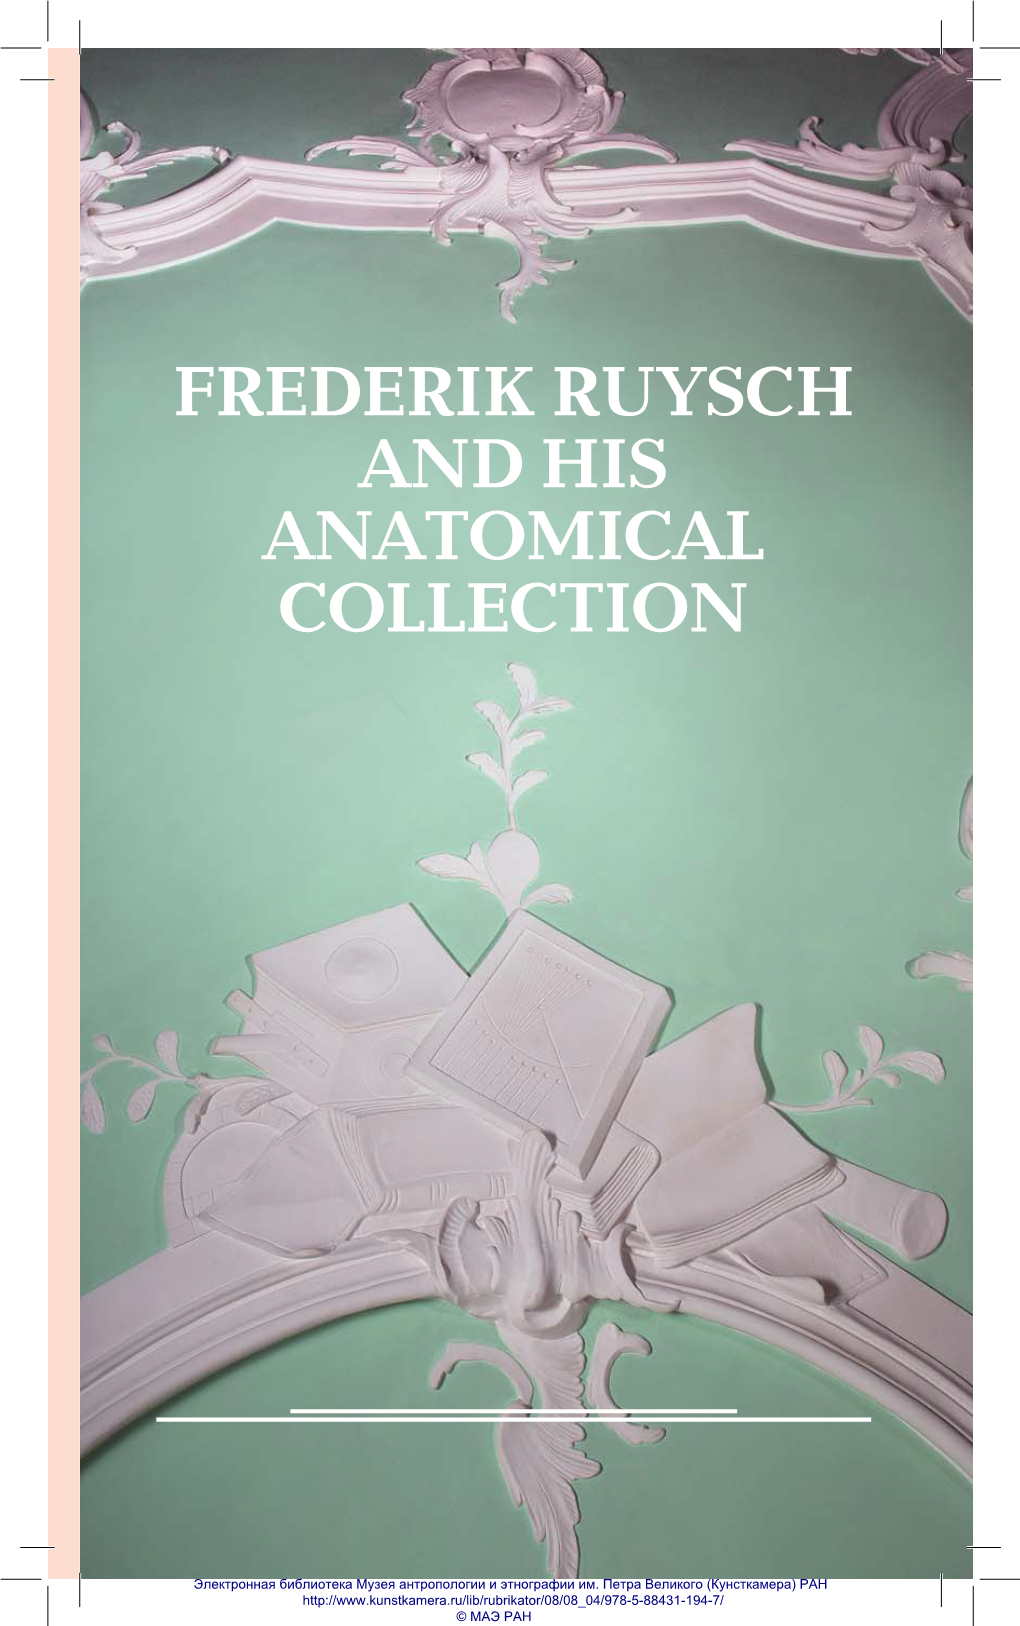 Frederik Ruysch and His Anatomical Collection